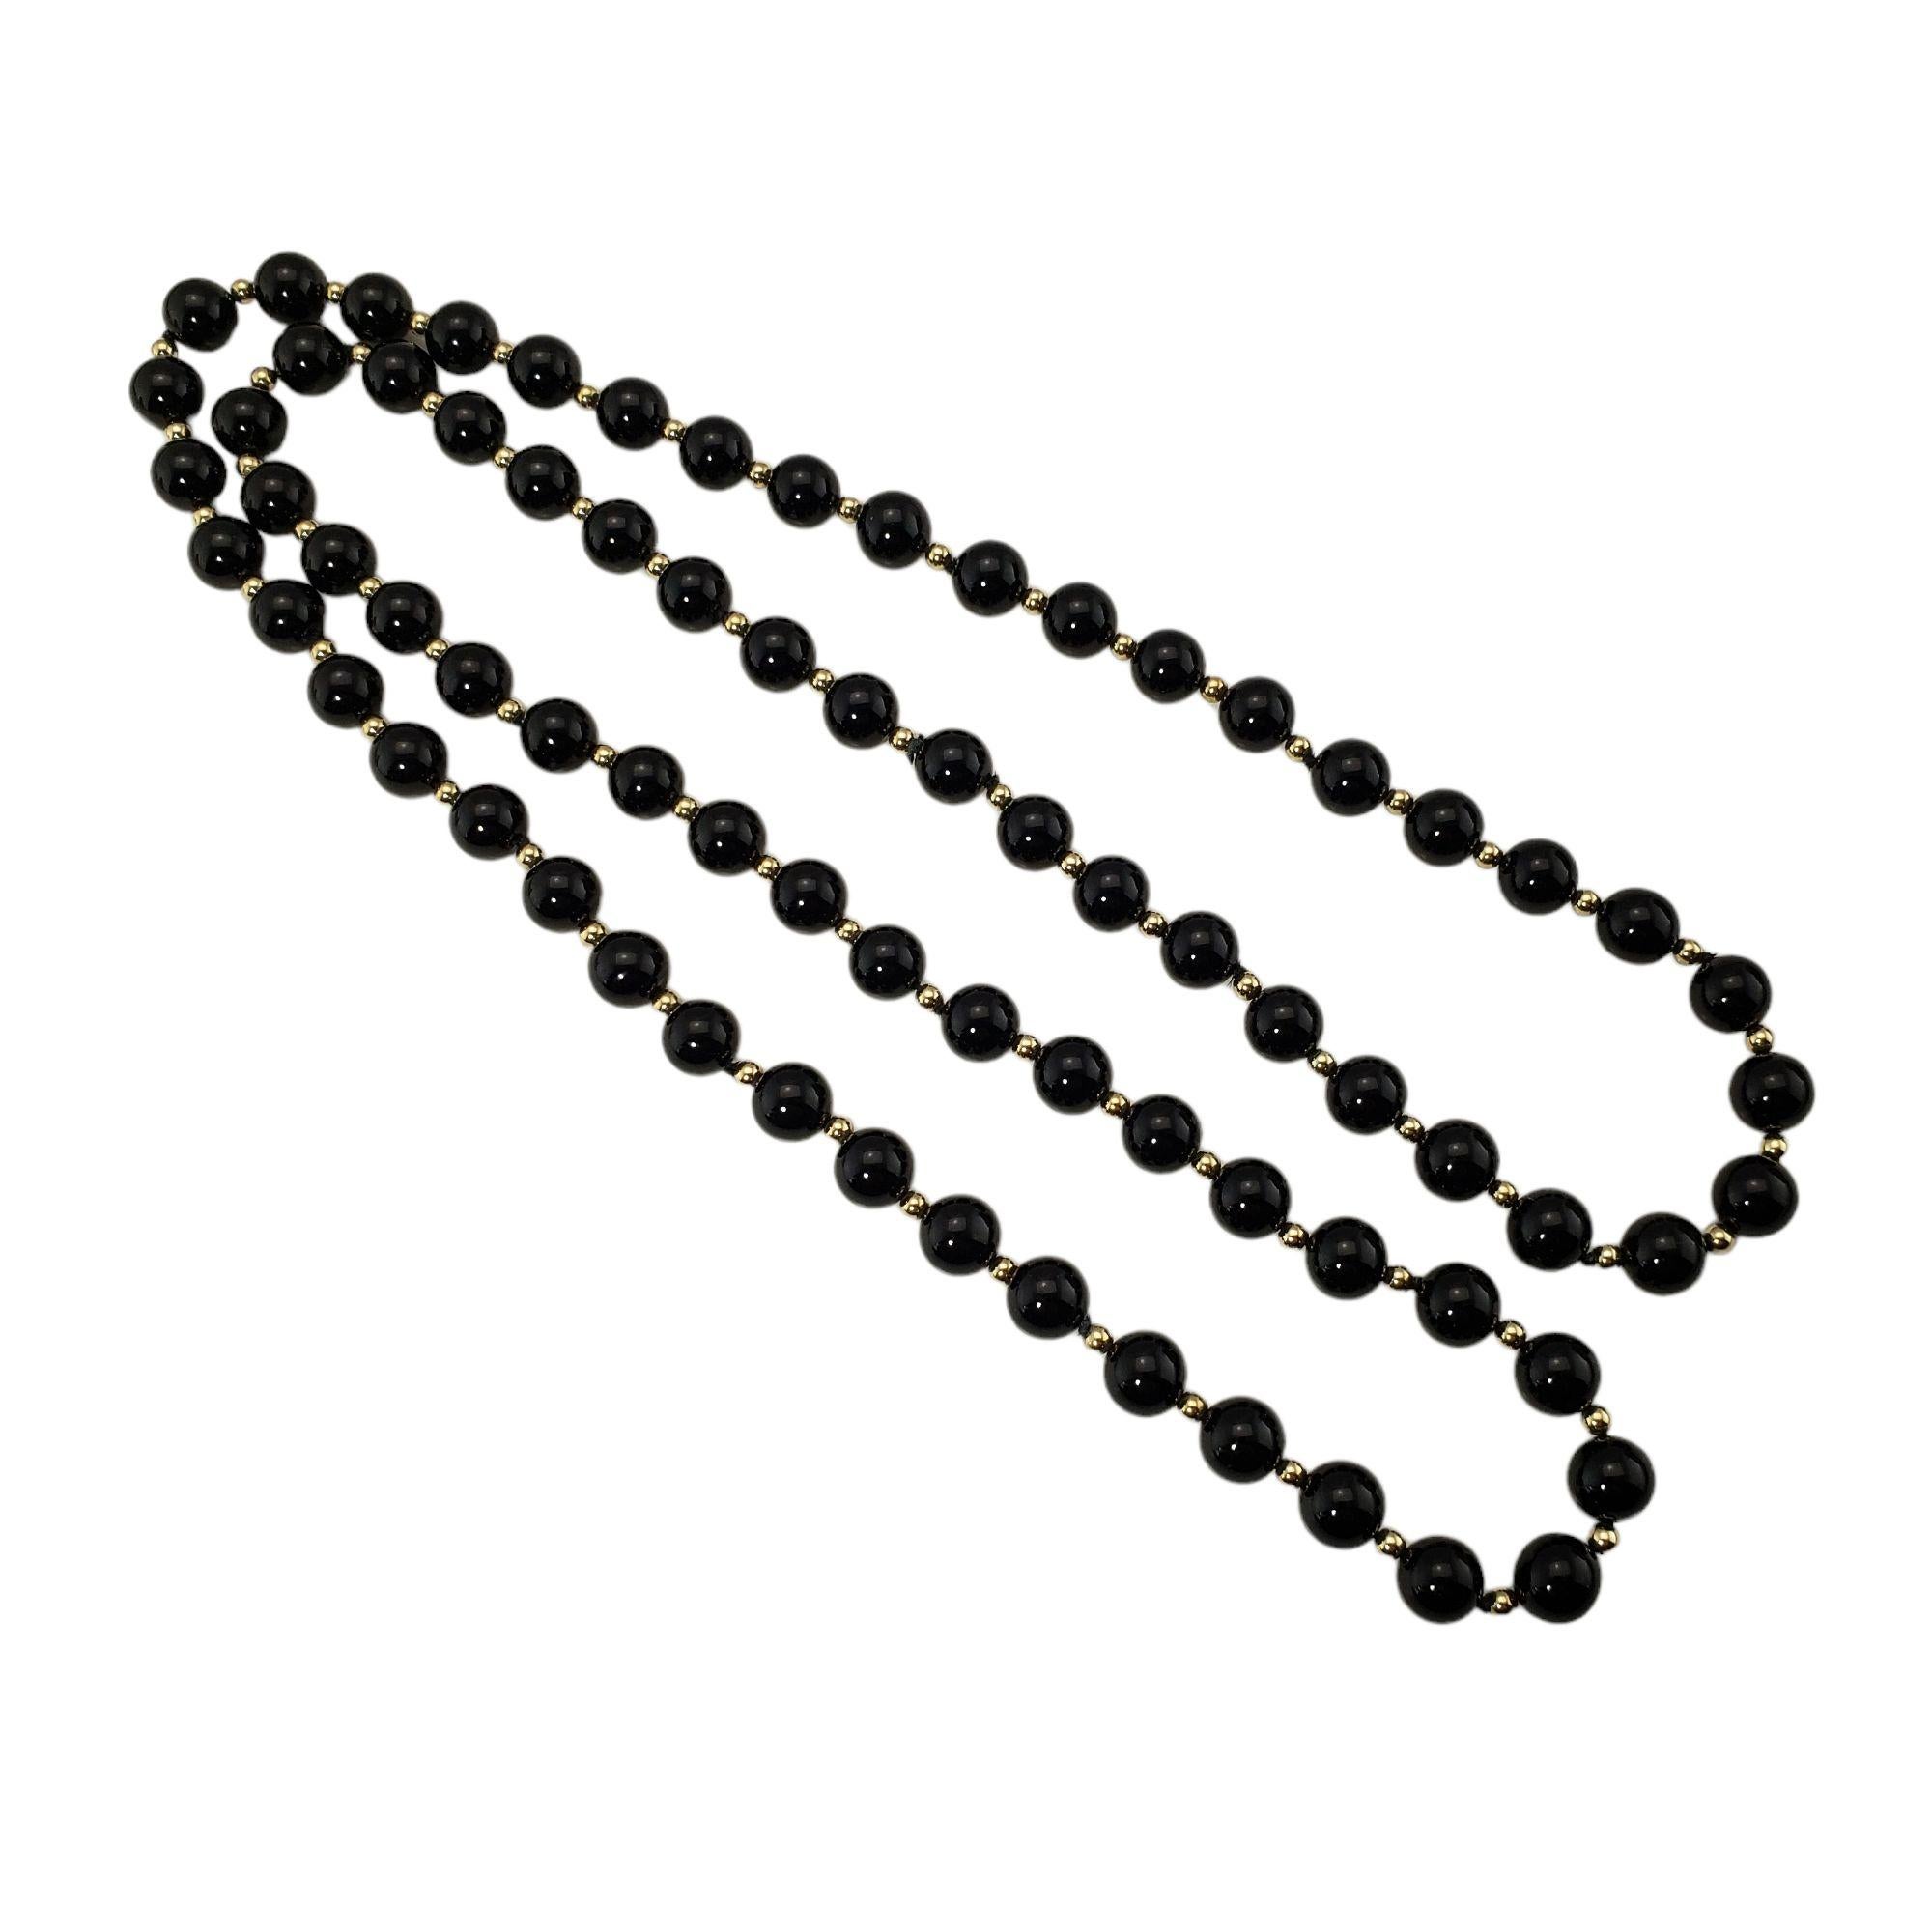 Vintage 14 Karat Yellow Gold and Onyx Necklace-

This lovely 14K yellow gold necklace features 74 round onyx beads (8 mm each).

Size: 31 inches

Weight: 33.4 dwt. / 52.0 gr.

Tested 14K gold.

Very good condition, professionally polished.

Will